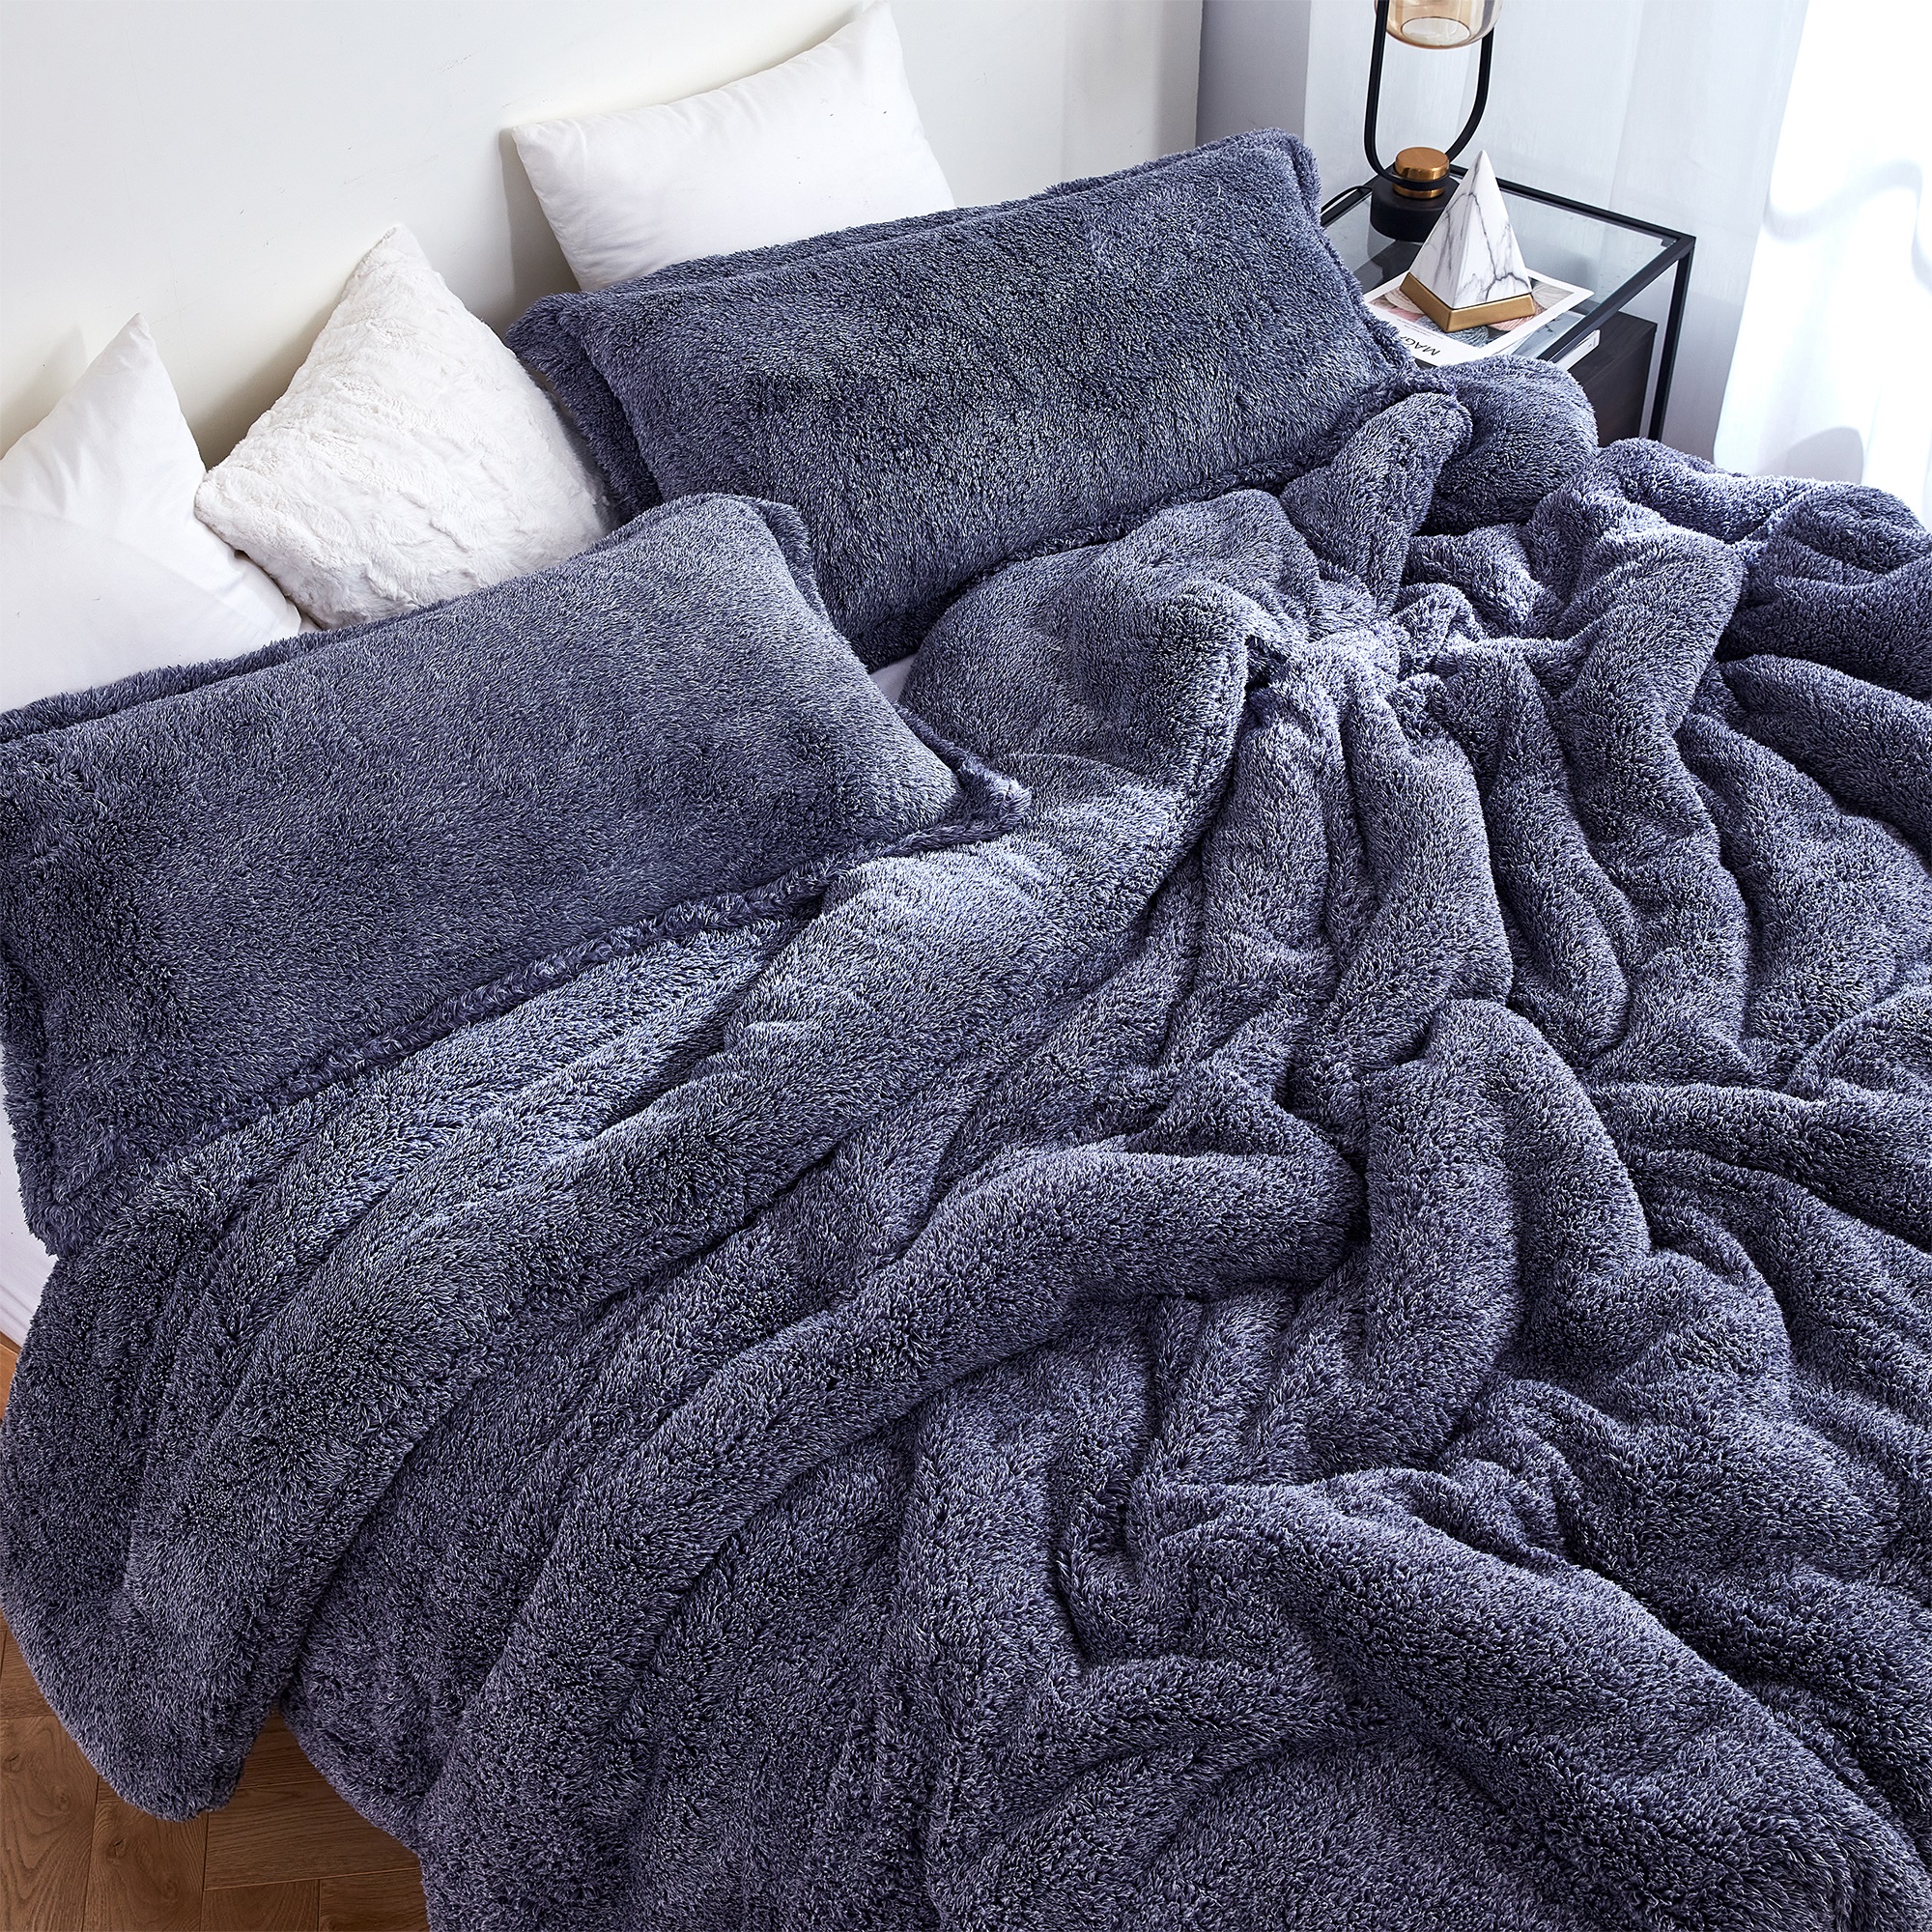 Coma Inducer Oversized Comforter - The Original Plush - Frosted Cobalt